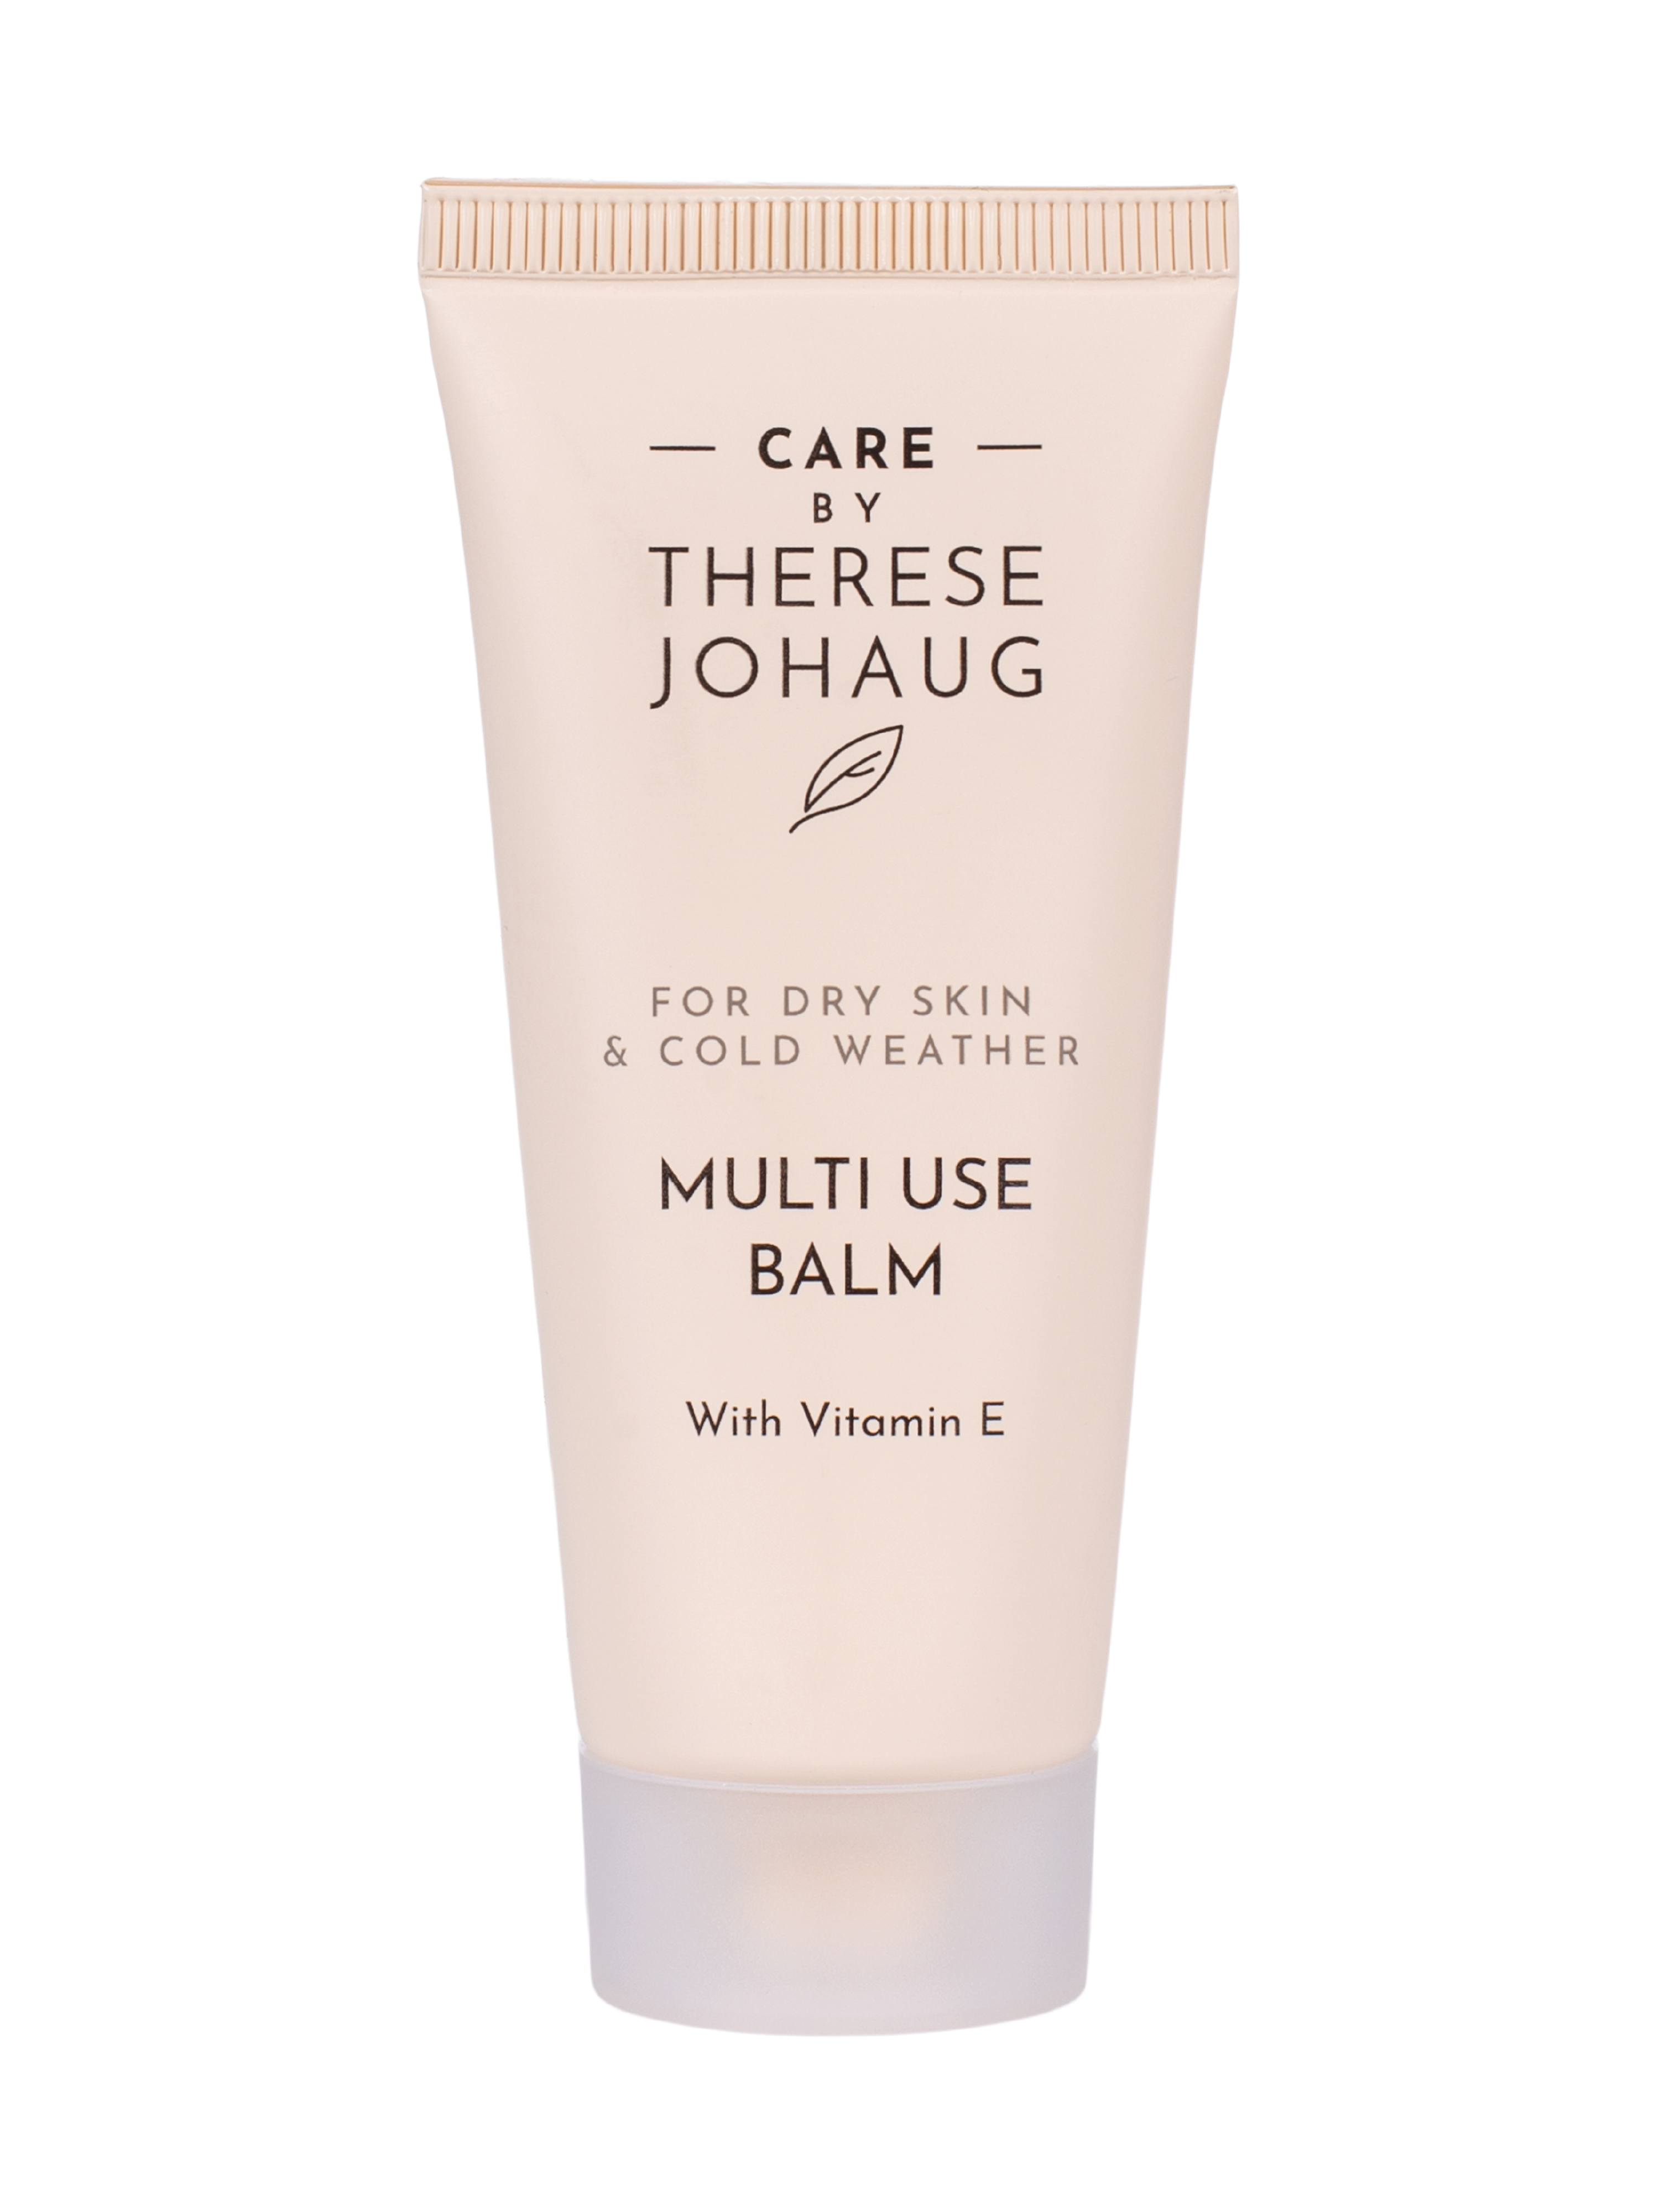 Care by Therese Johaug Multi Use Balm, 30 ml